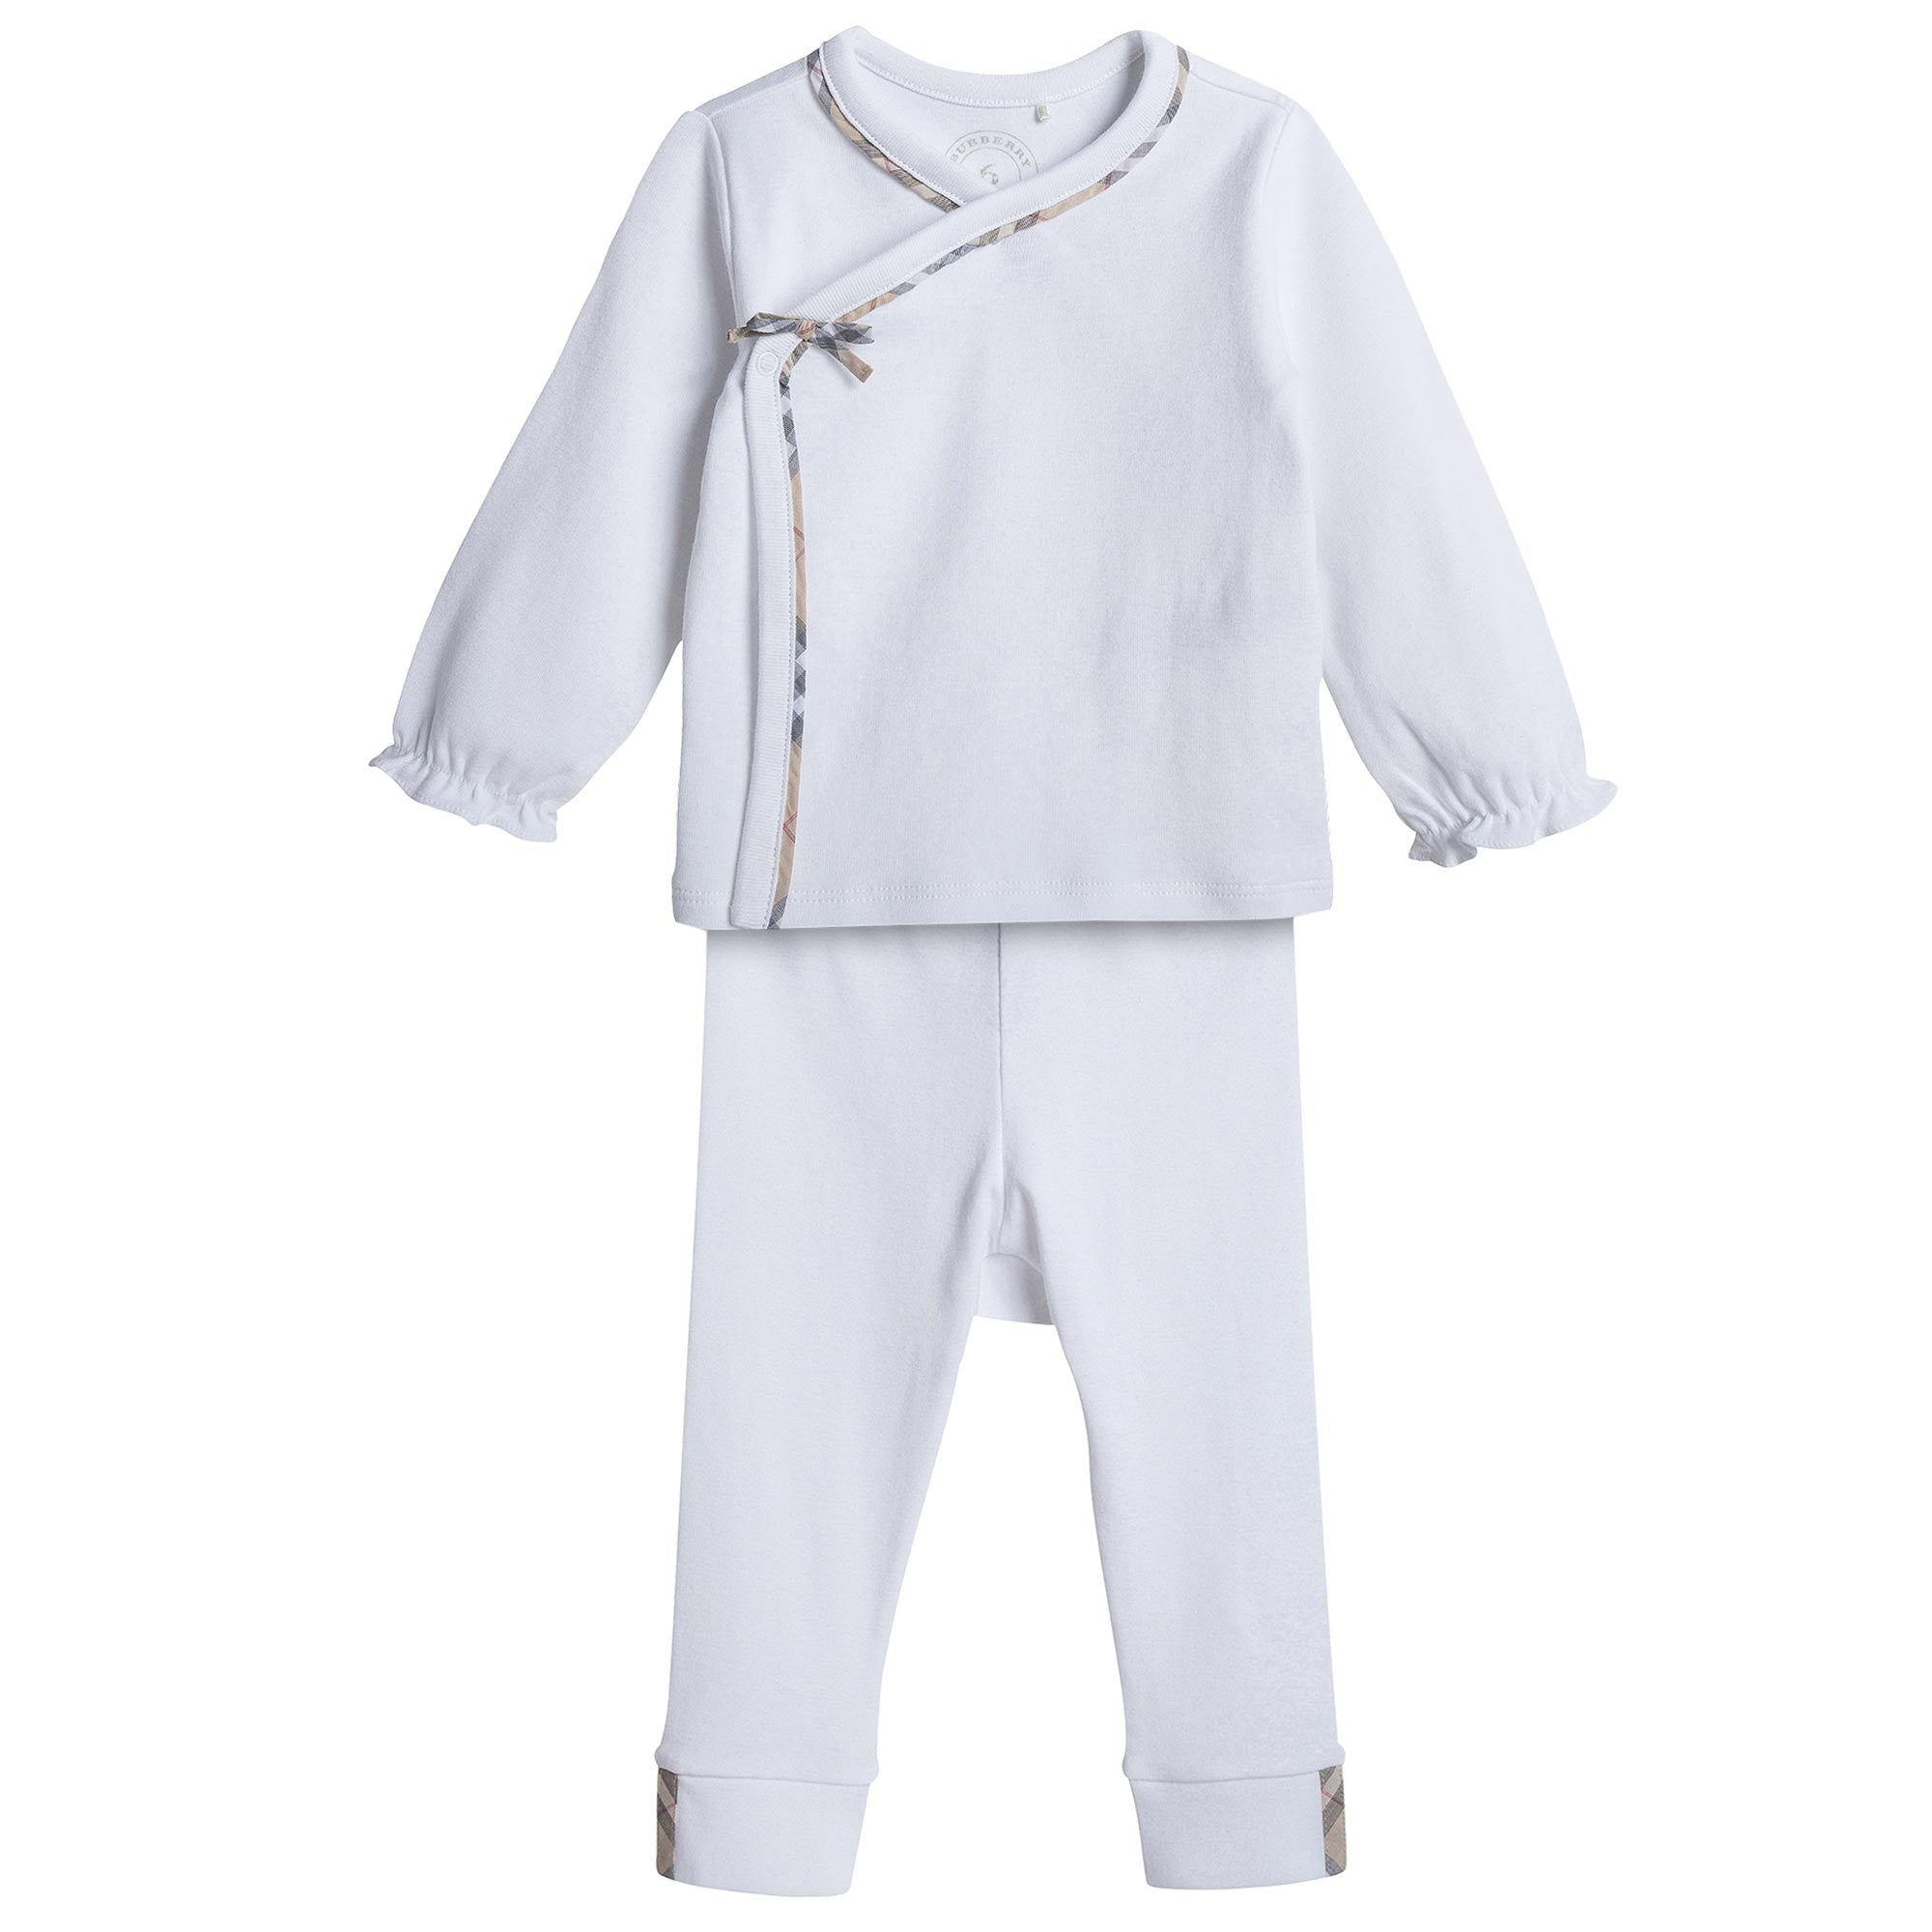 Baby Girls White Top & Trousers 2 Piece Gift Set - CÉMAROSE | Children's Fashion Store - 1